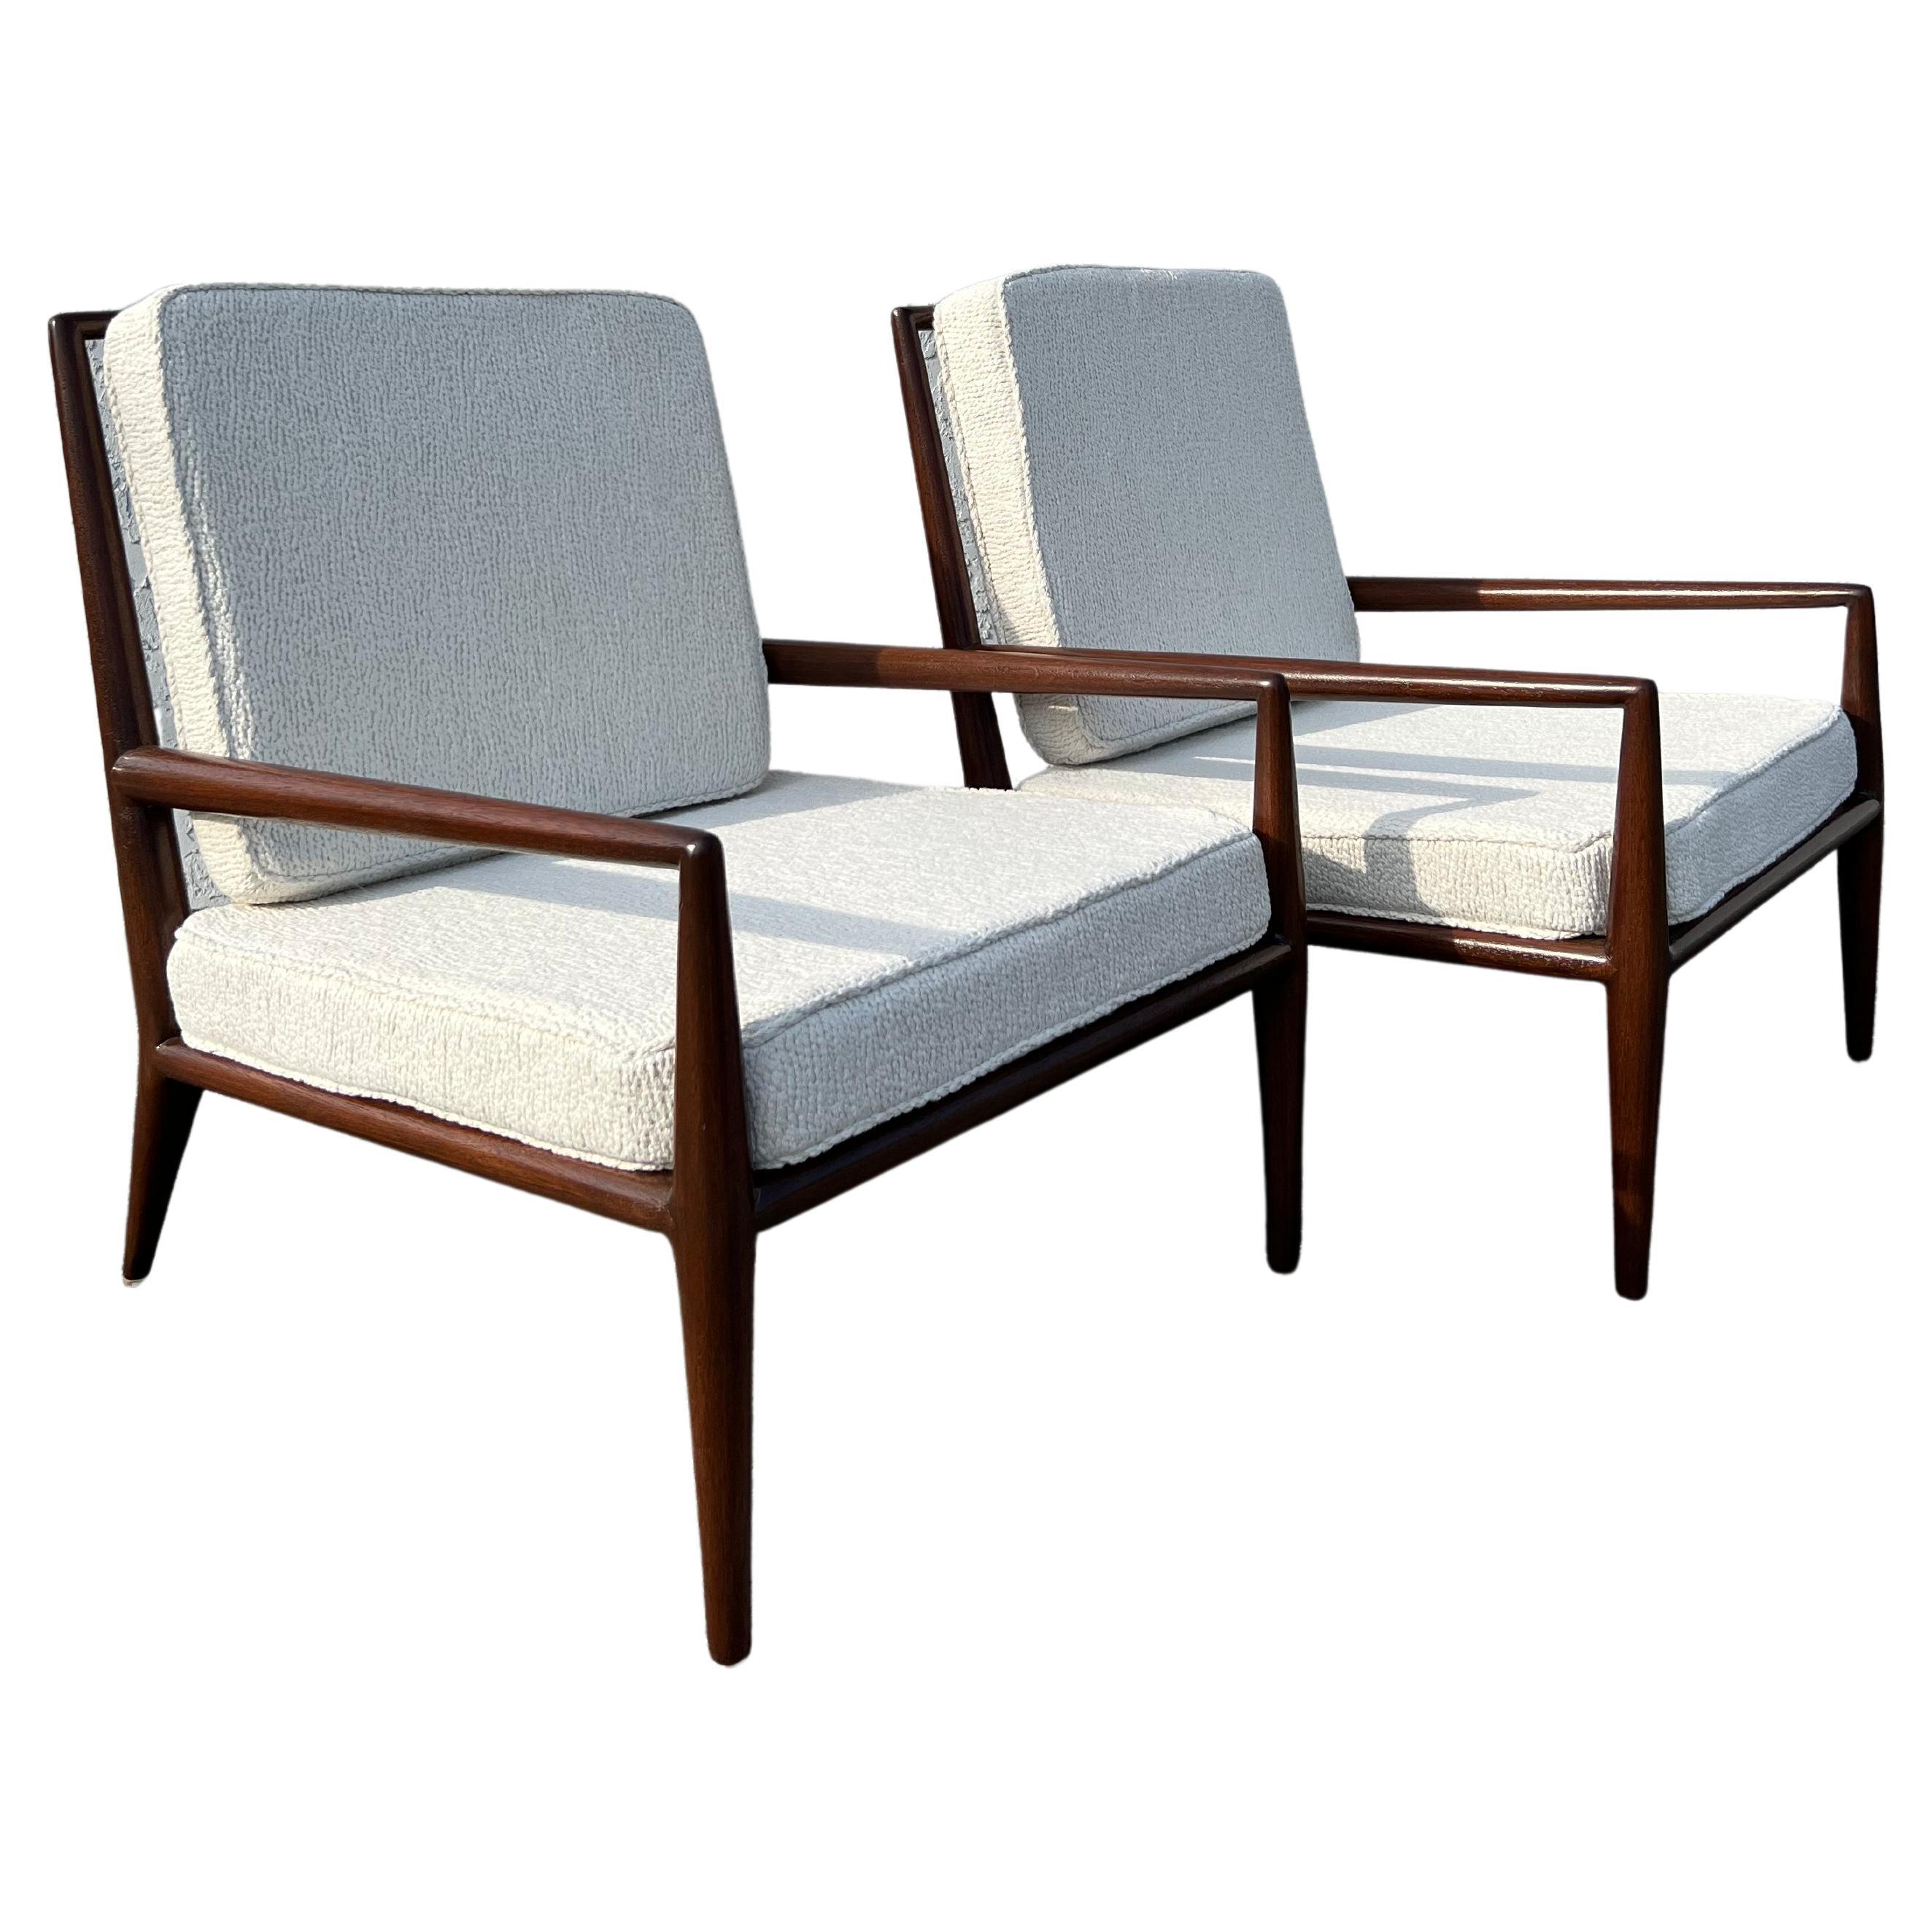 T.H Robsjohn-Gibbings for Widdicomb Attributed Lounge Chairs, a Pair For Sale